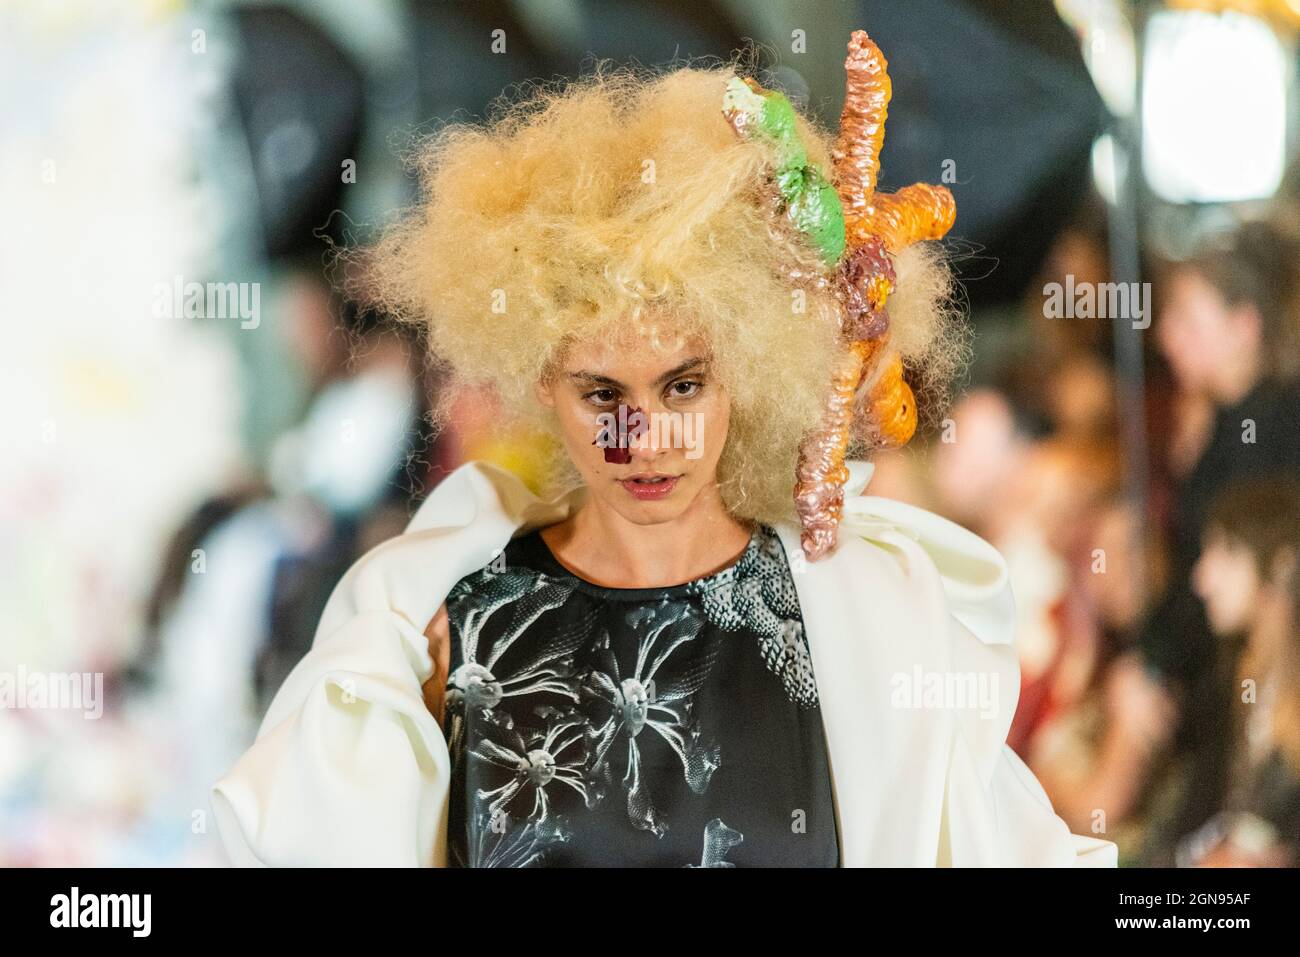 Ivelina Choeva on the catwalk in the ballroom of Dorchester Hotel modelling Vin + Omi Future Flowers fashion designs for London Fashion Week Stock Photo